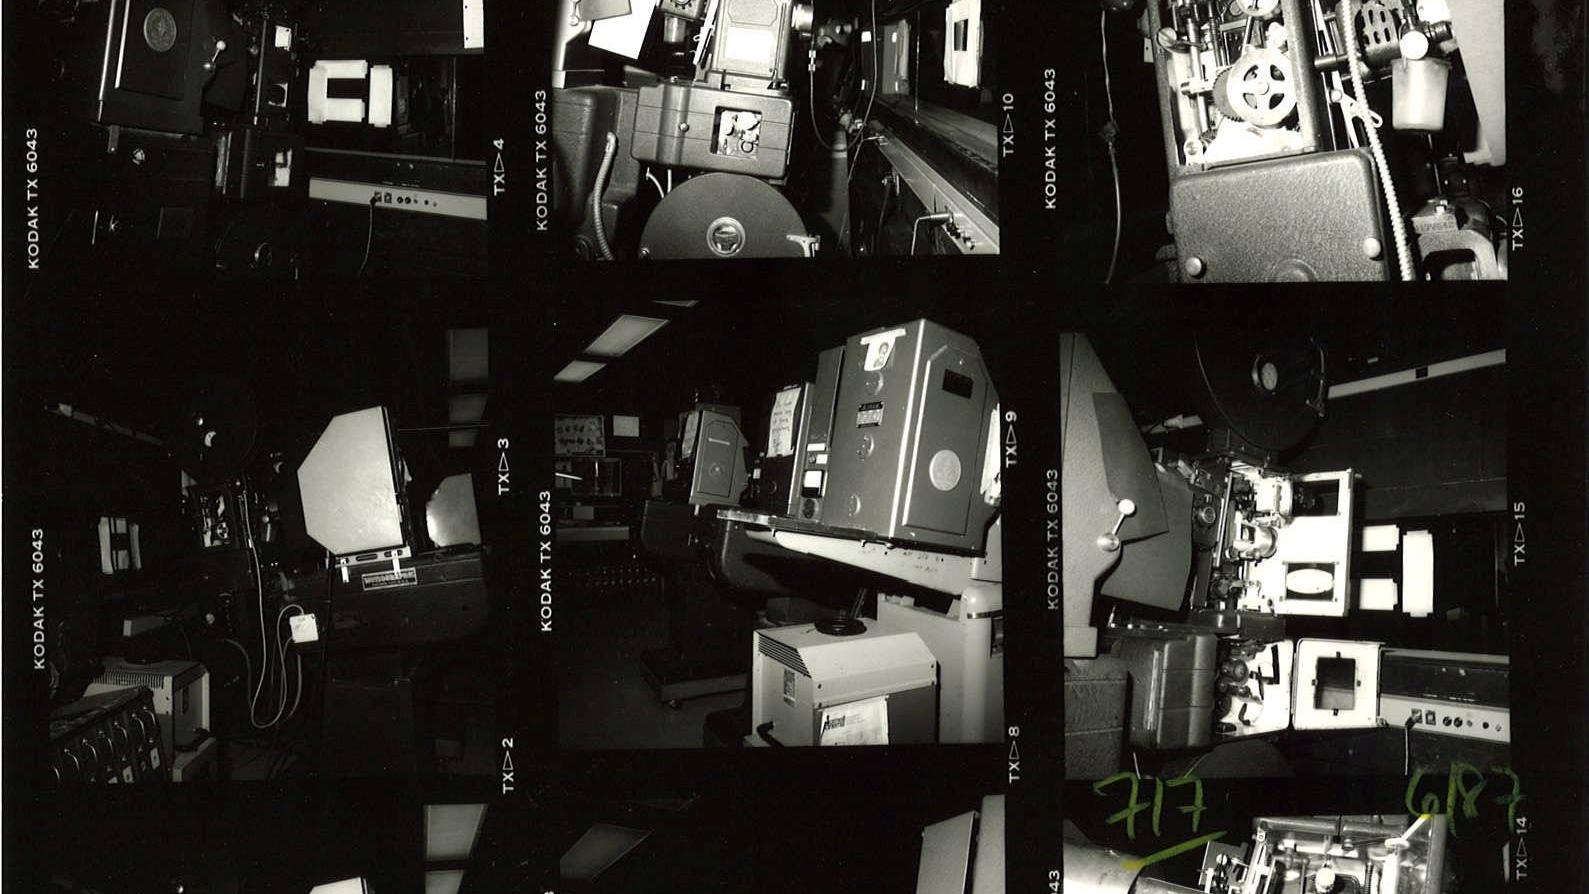 A sheet of black and white close-up photos of projection equipmetn